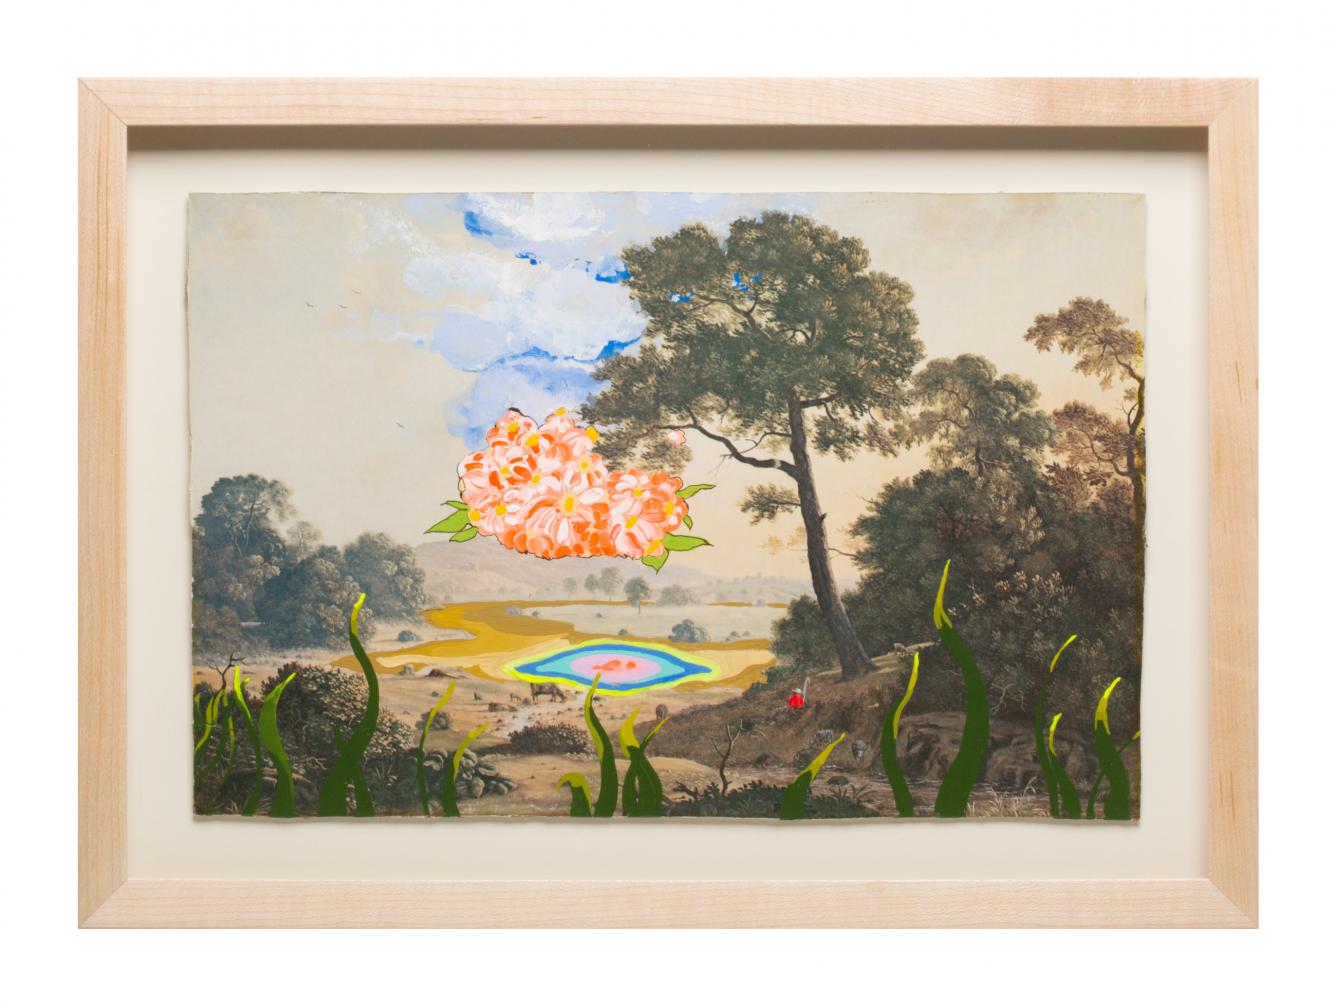 Painting on vintage print that depicts a scenic, colorful landscape image.